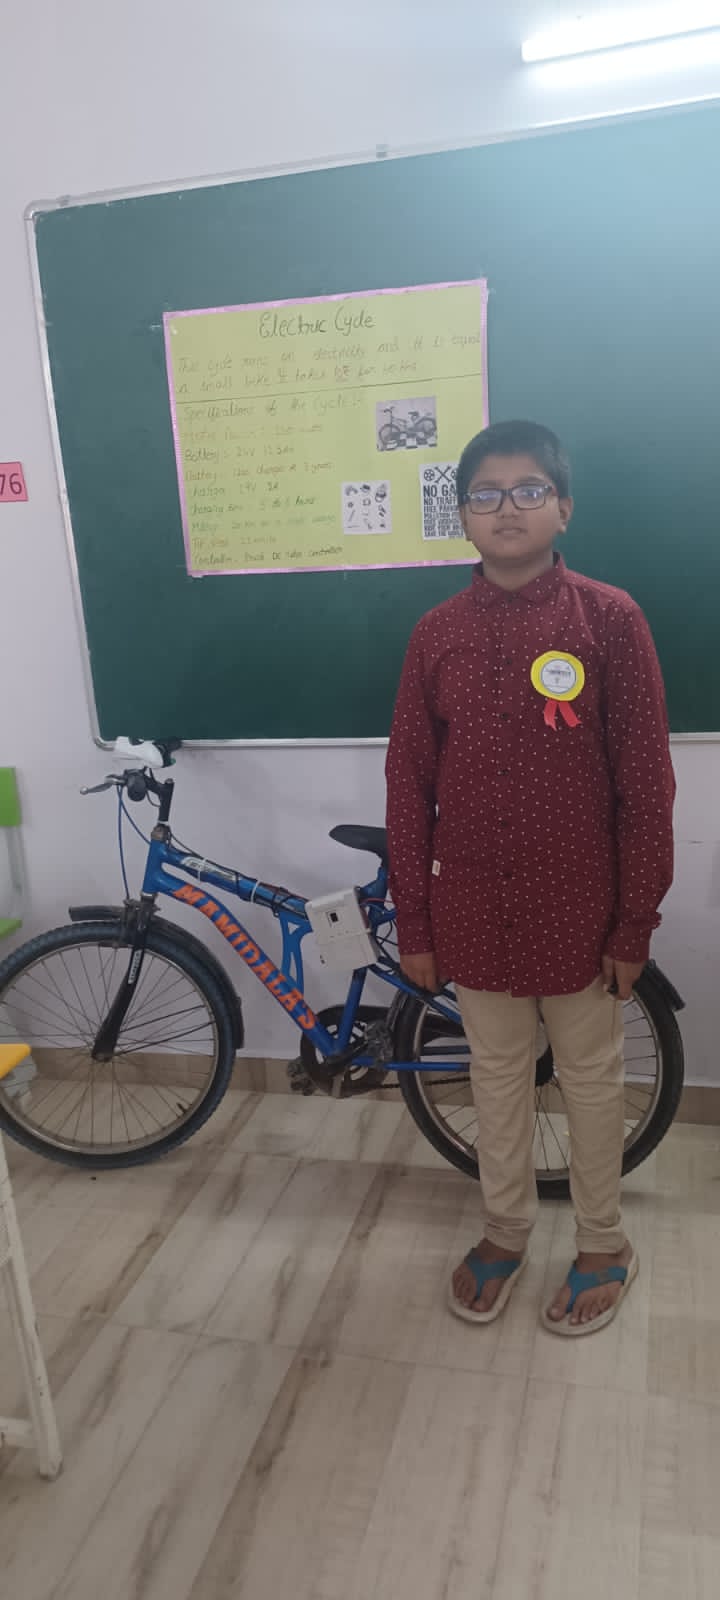 Abyudh with the electric bicycle that his dad created